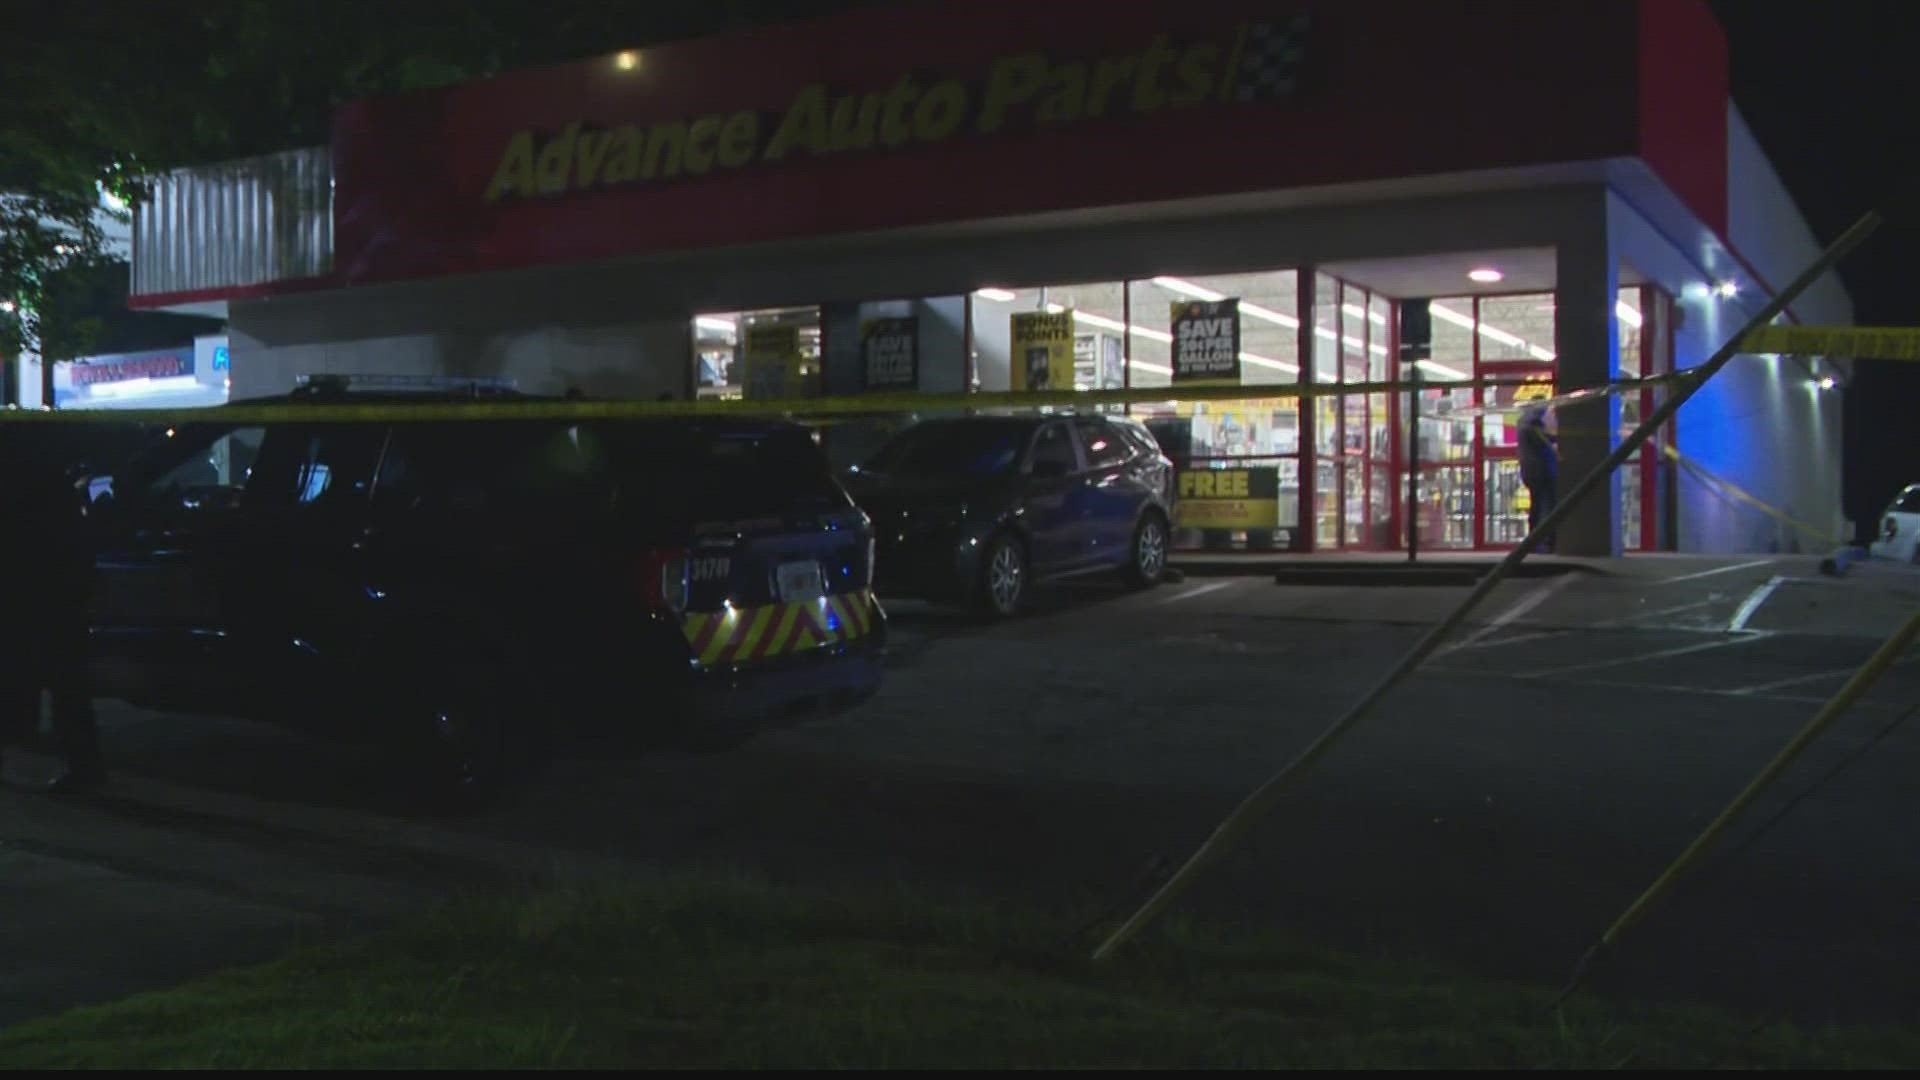 Authorities said it happened near the Advance Auto Parts store at 1395 Moreland Ave SE.